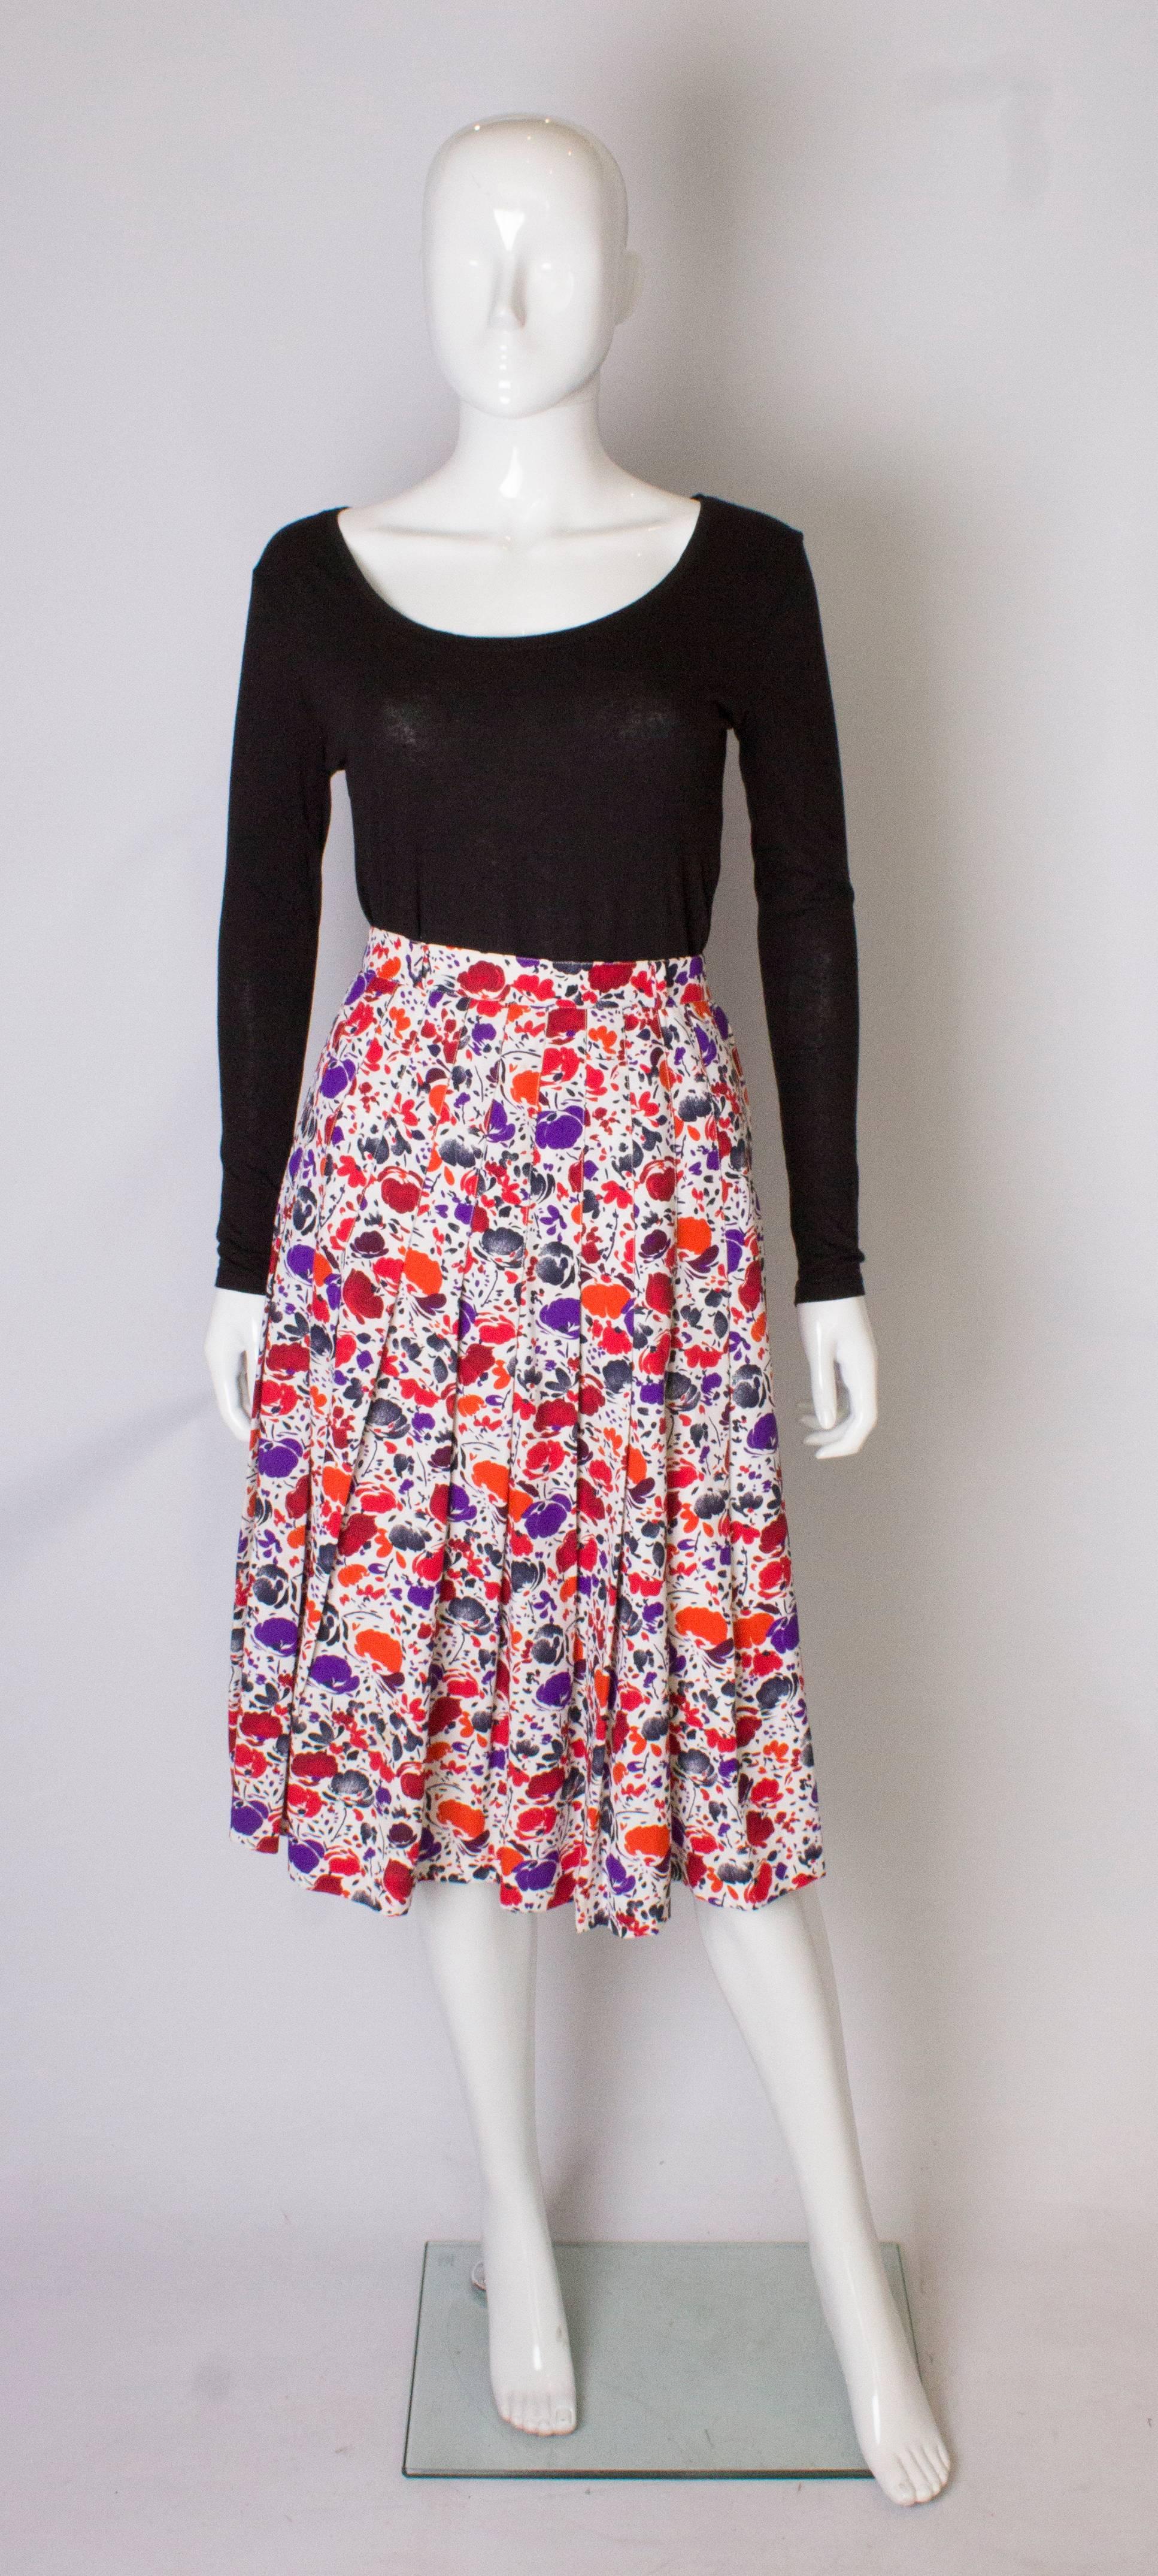 A chic pleated skirt by Jean Louis Scherer Boutique. The skirt is number 087951, and has a white background with a red, orange and purple print. The skirt has sewn in pleats to the hip and so creates a smooth line. The skirt has a zip opening and